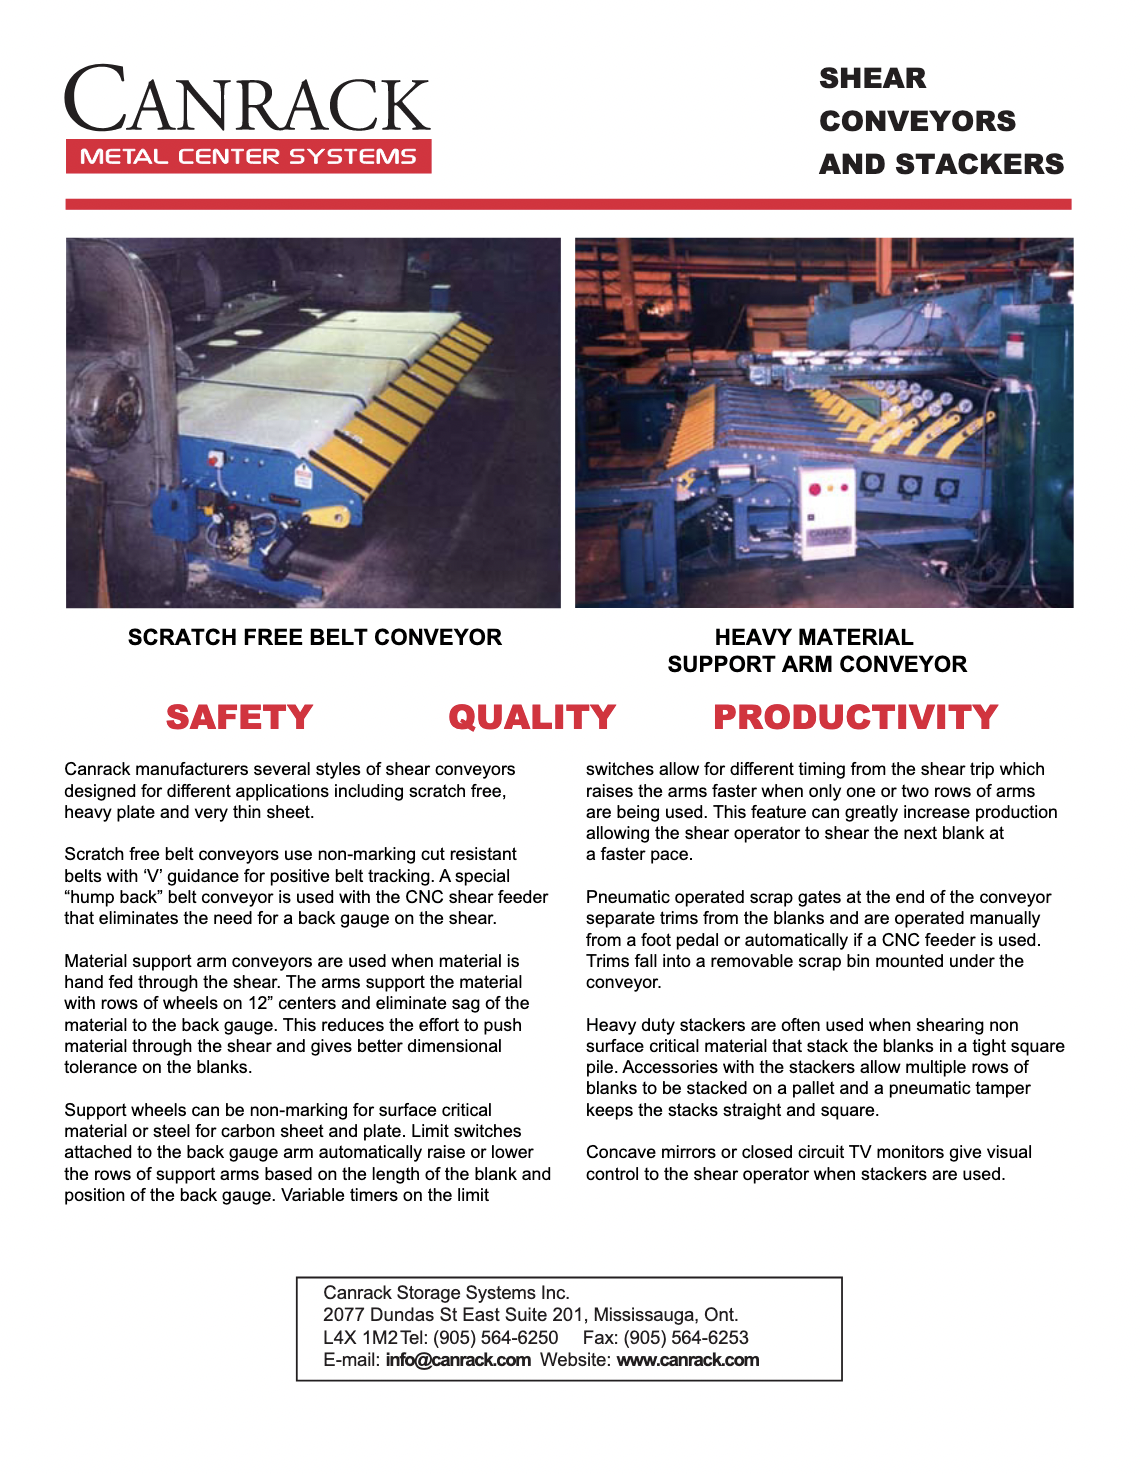 Shear Conveyors and Stackers Info Sheet